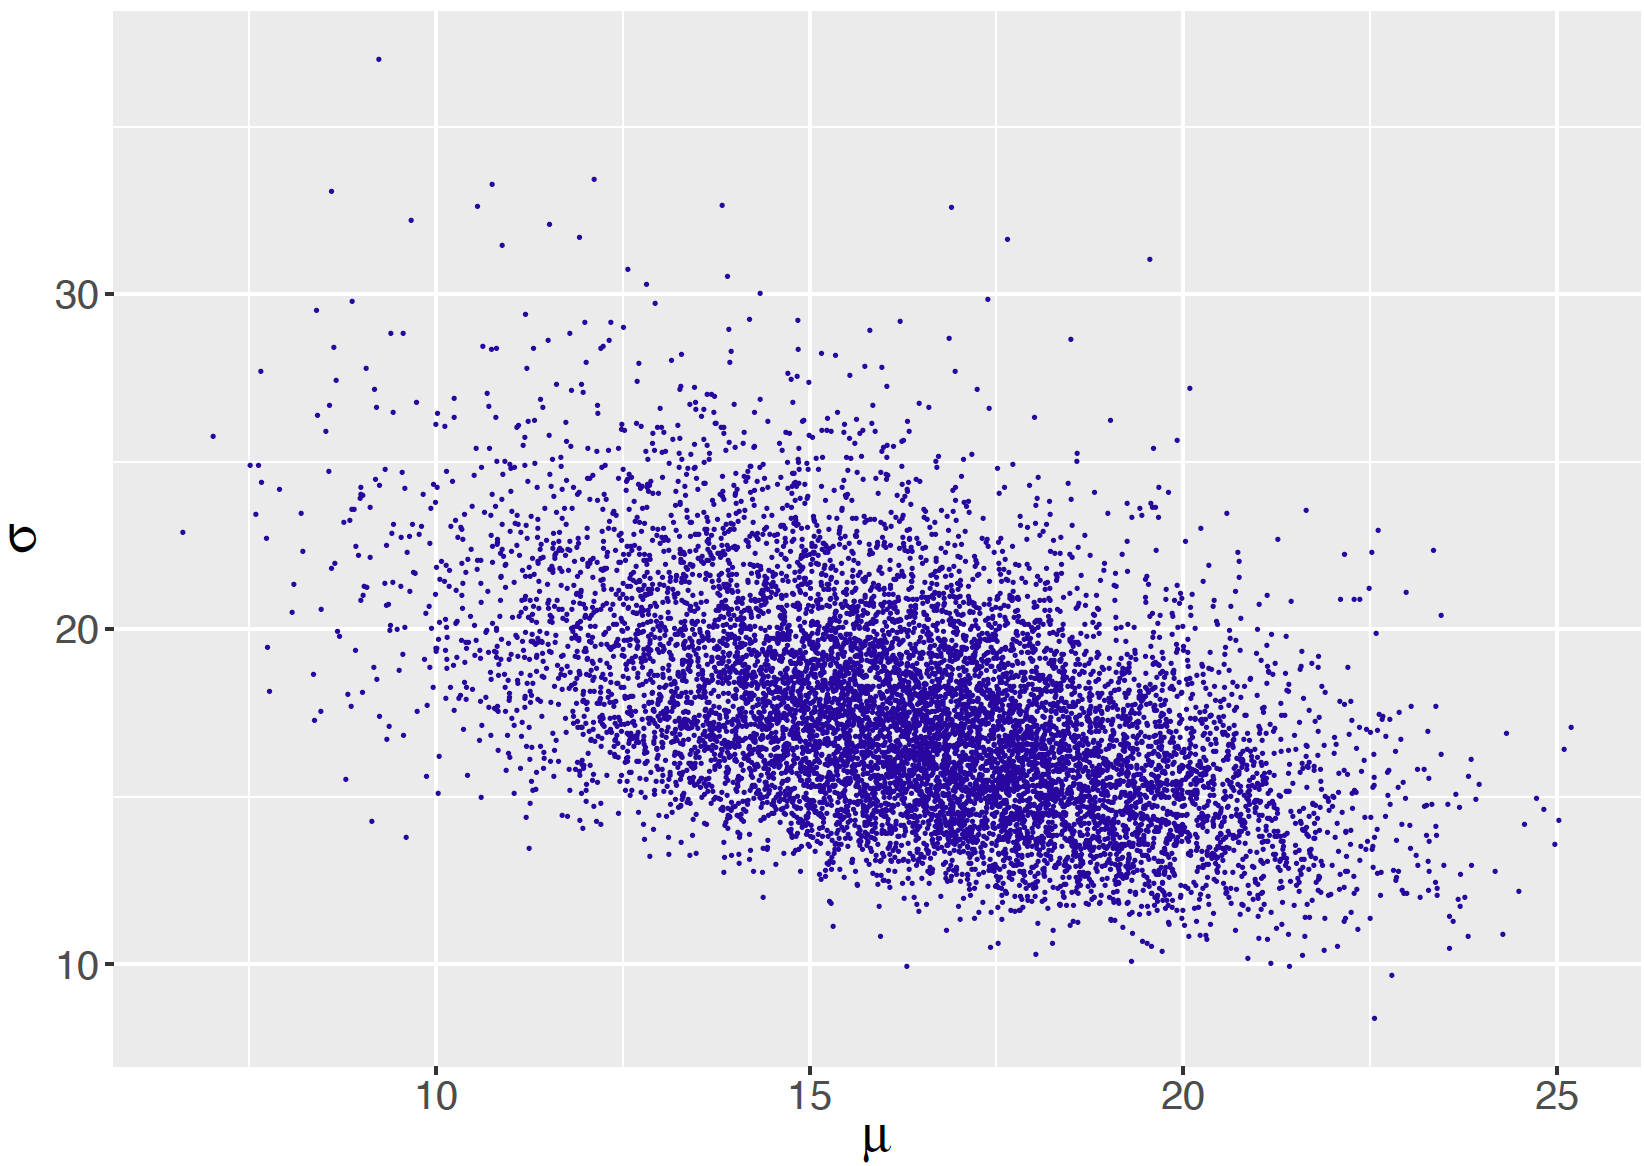 Scatterplot of simulated draws of the posterior distribution of mean and standard deviation from Gibbs sampling for the Normal sampling model with independent priors on the  mean and the precision.